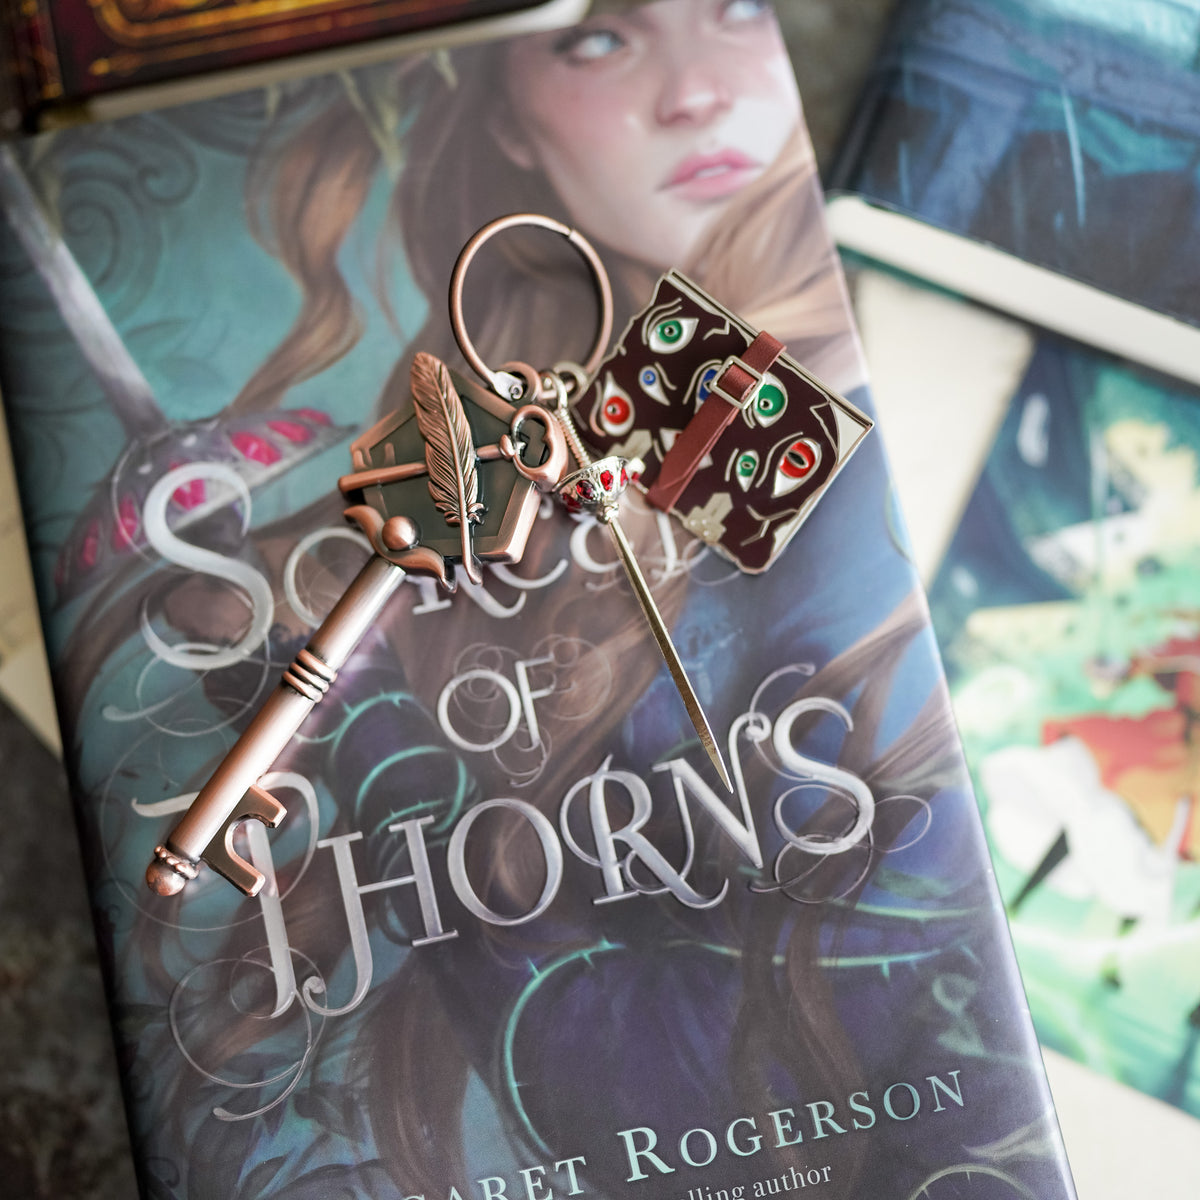 Sorcery of Thorns Key is bronze metal and has a sword charm and a mini grimoire with eyes looking at you